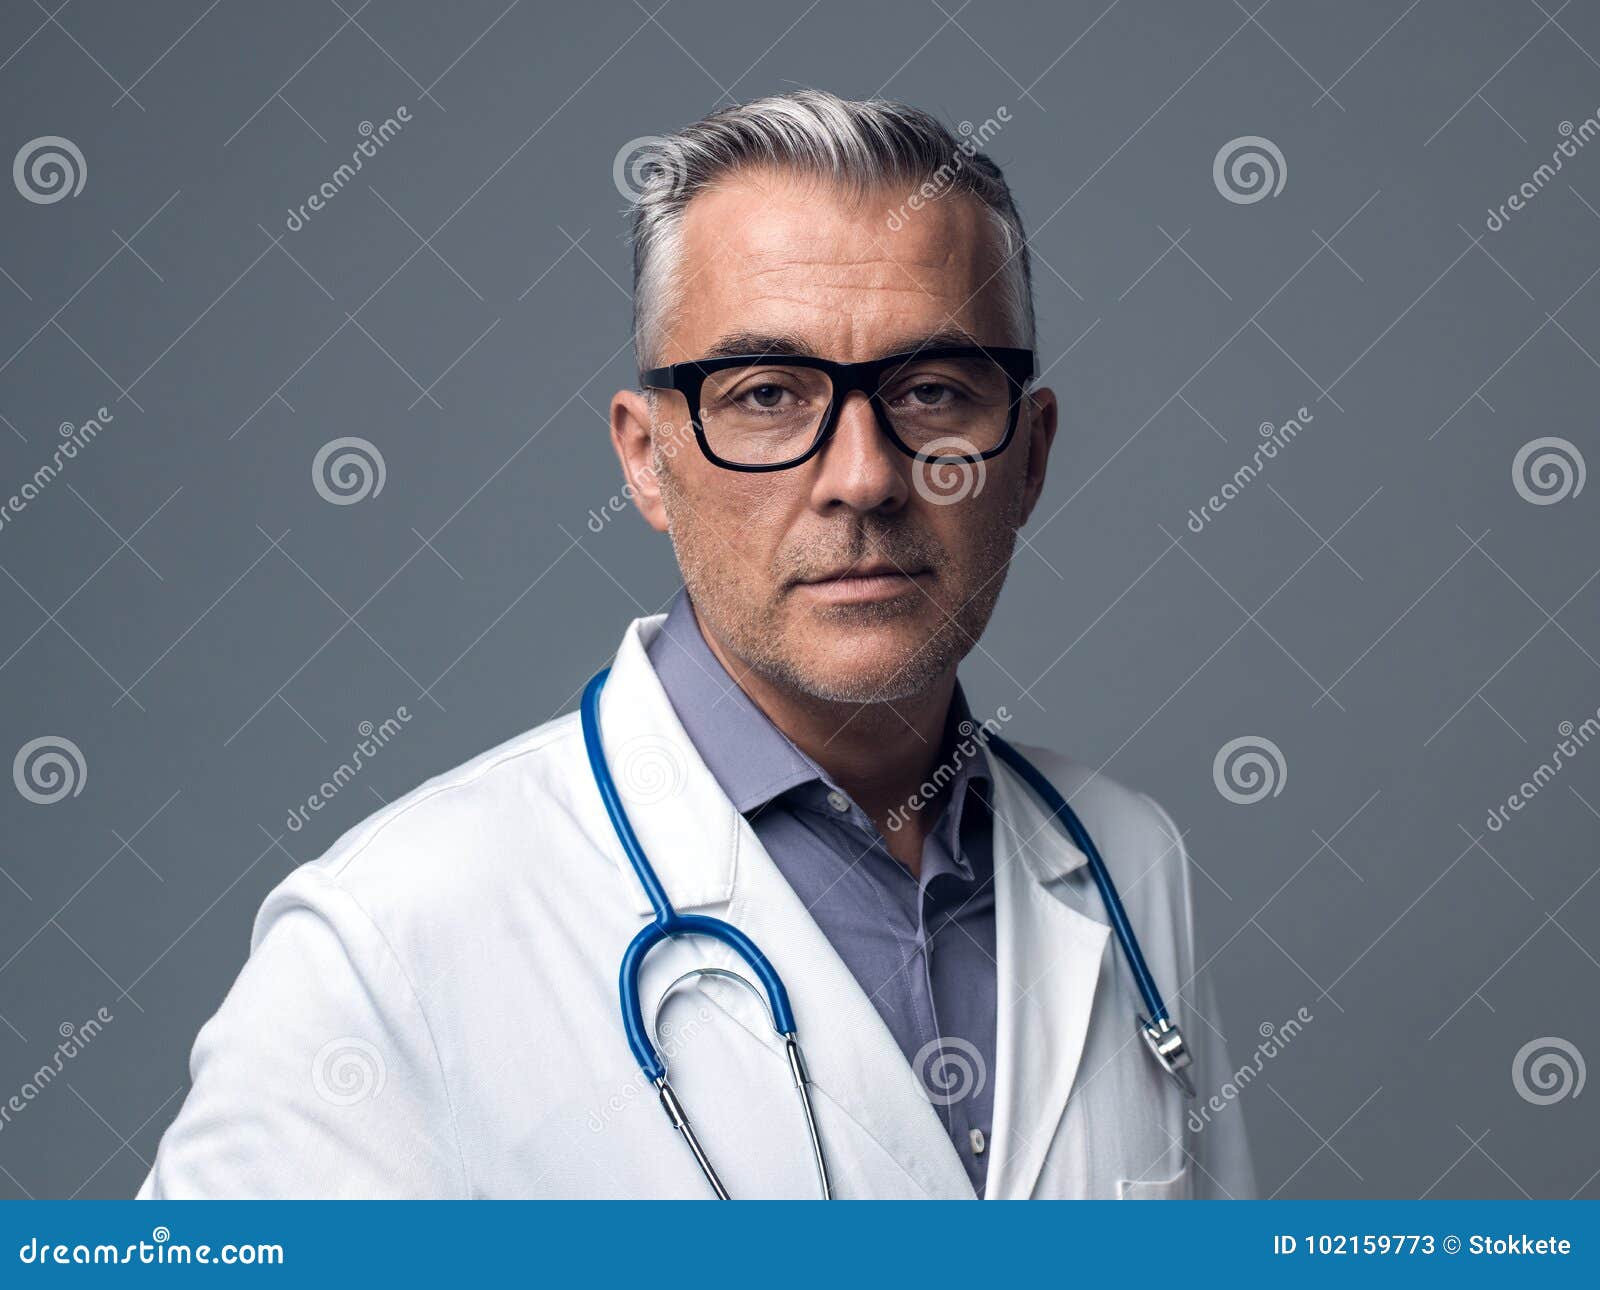 chief physician